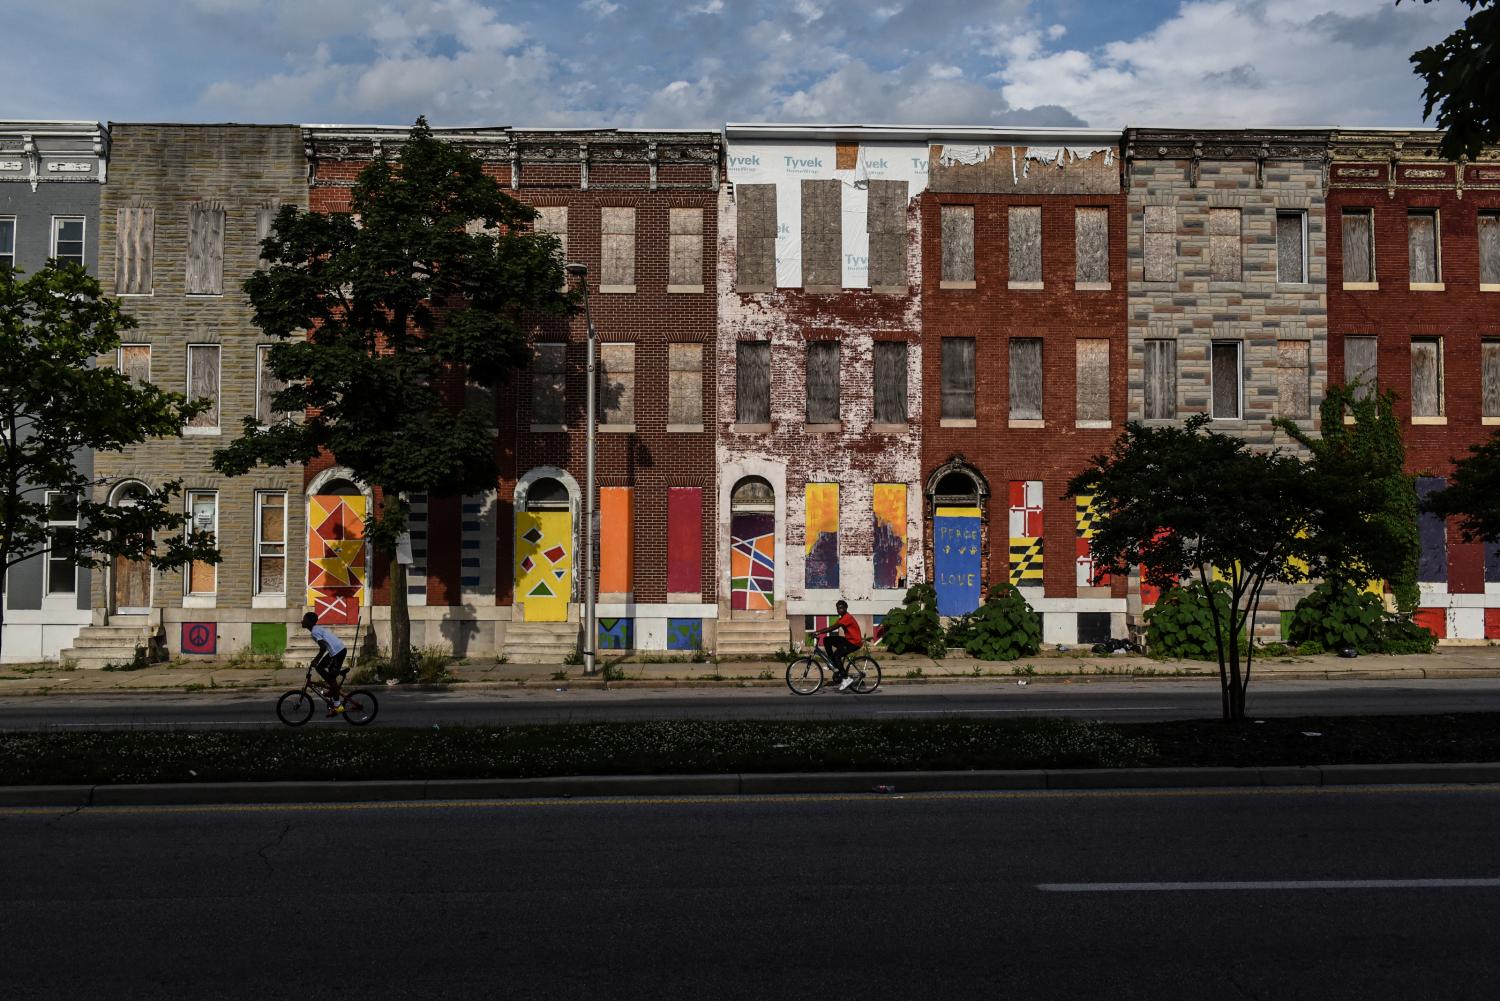 Young boys ride their bikes past boarded-up and abandoned row of houses in Baltimore, Maryland, U.S., May 26, 2019. REUTERS/Stephanie Keith  SEARCH "KEITH TOWNES" FOR THIS STORY. SEARCH "WIDER IMAGE" FOR ALL STORIES. - RC187F4B9C50